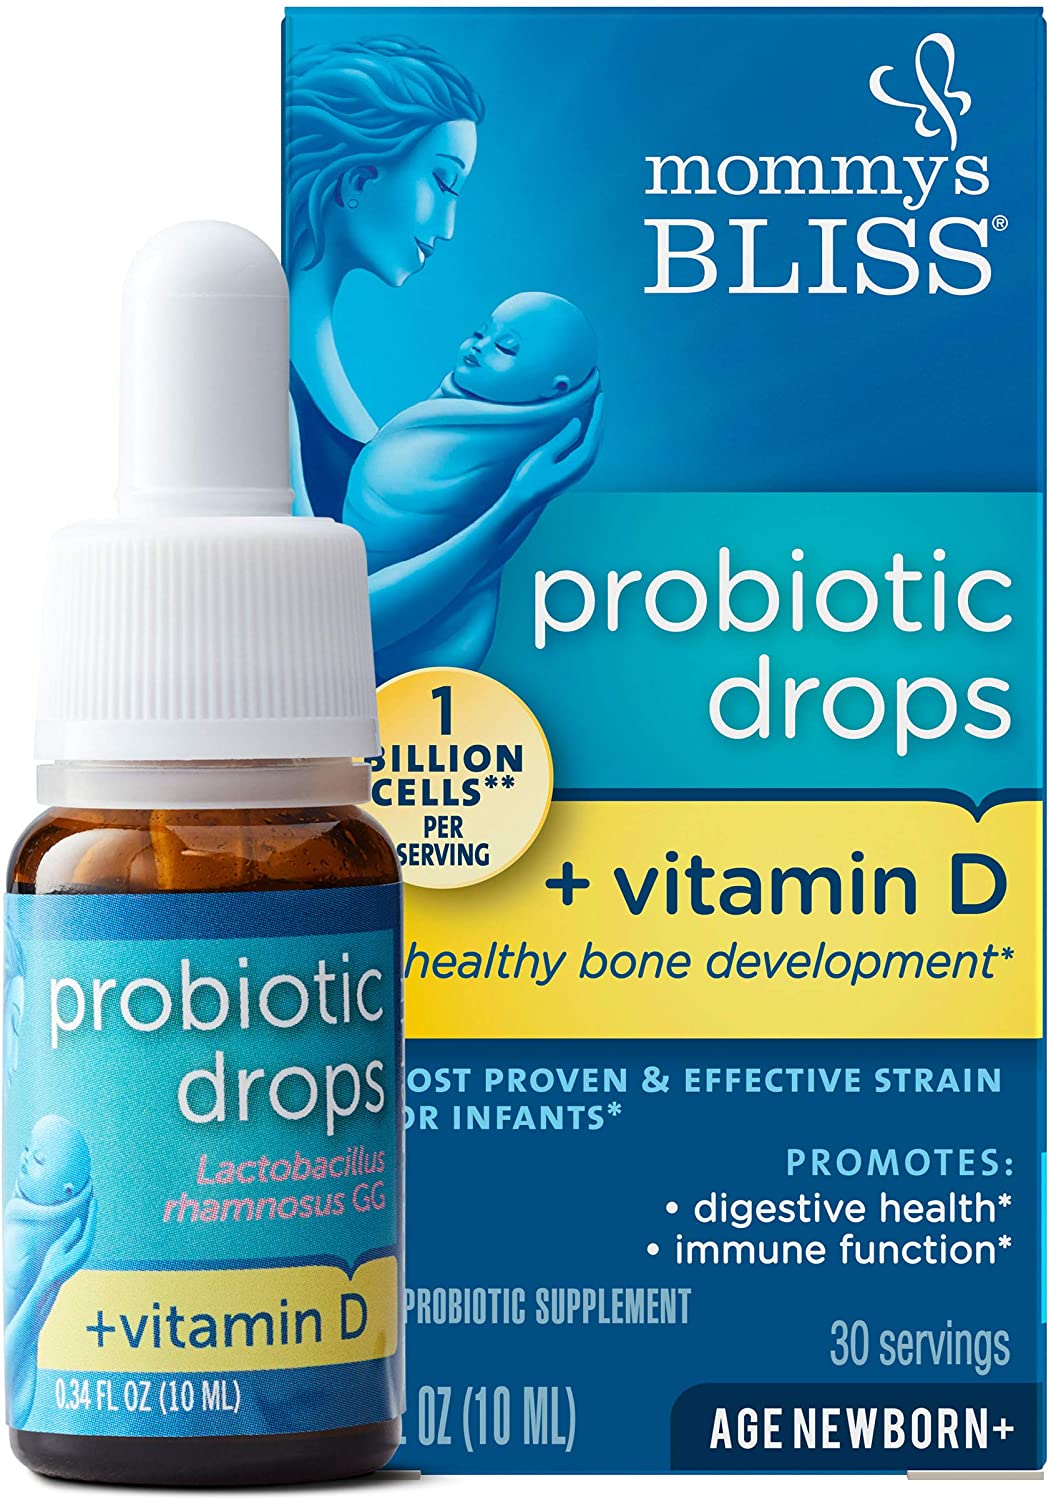 Mommy’s Bliss Probiotic Review